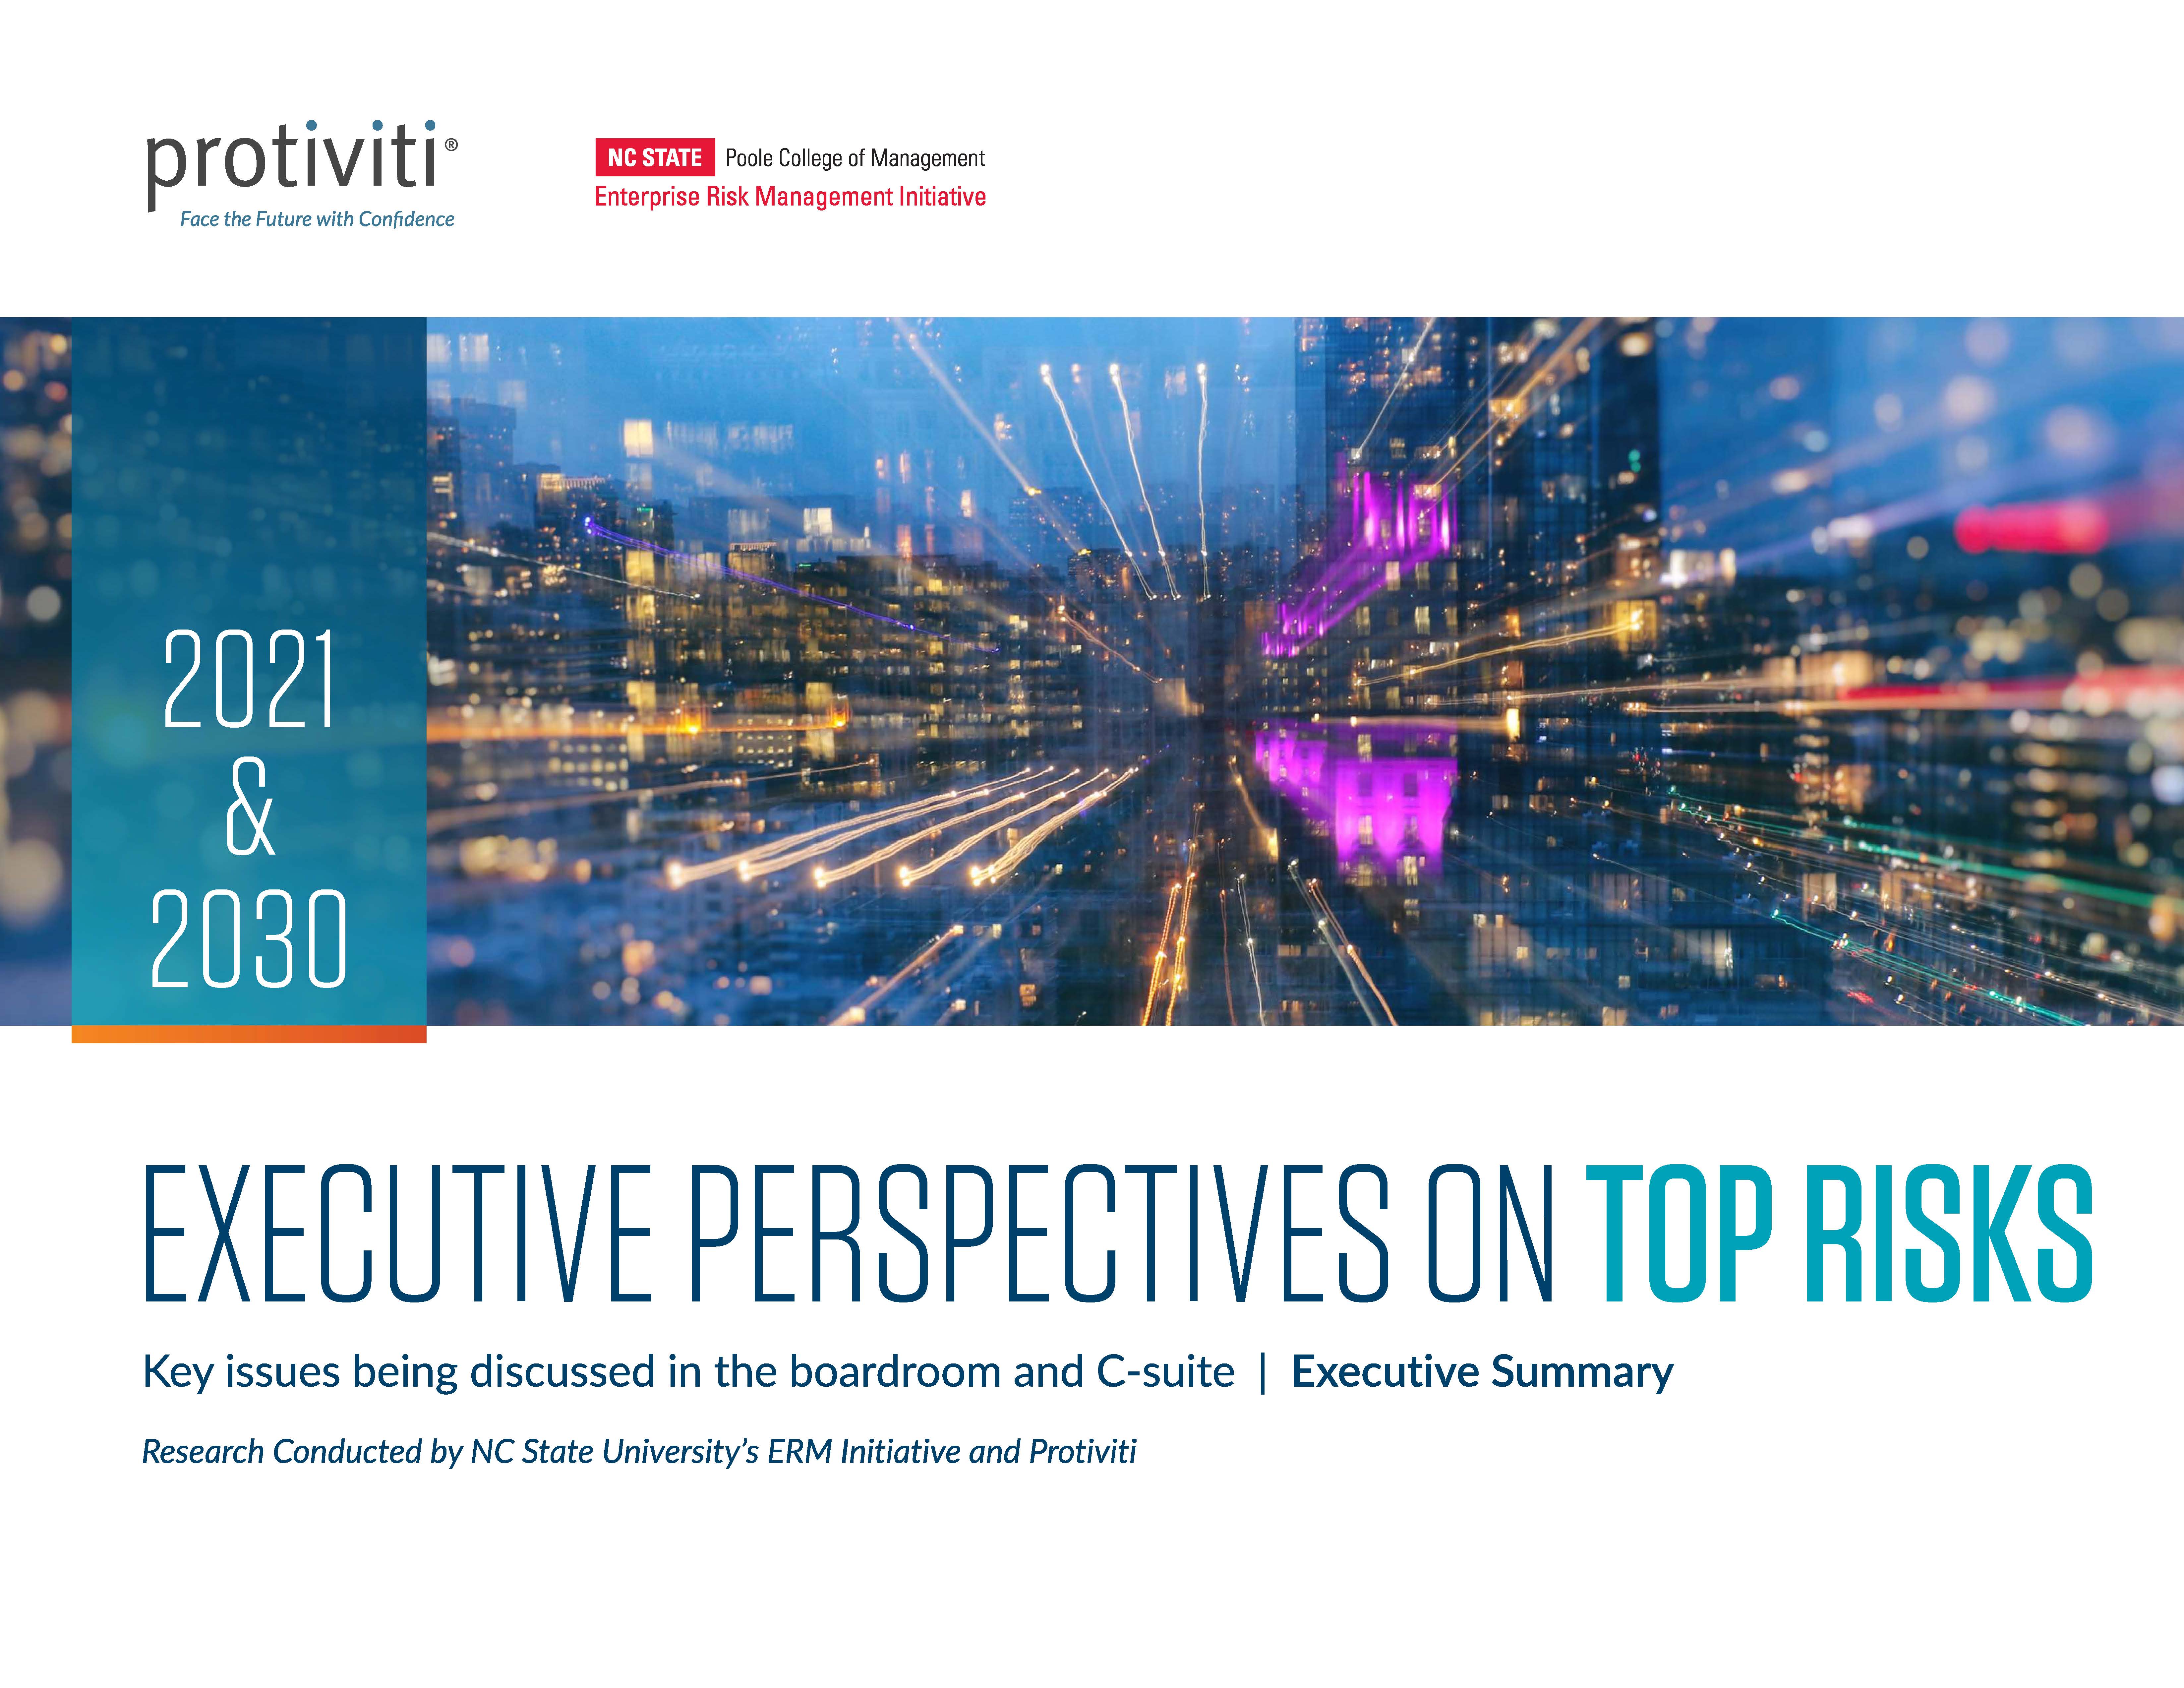 Screenshot of the first page of Executive Perspectives on Top Risks for 2021 and 2030